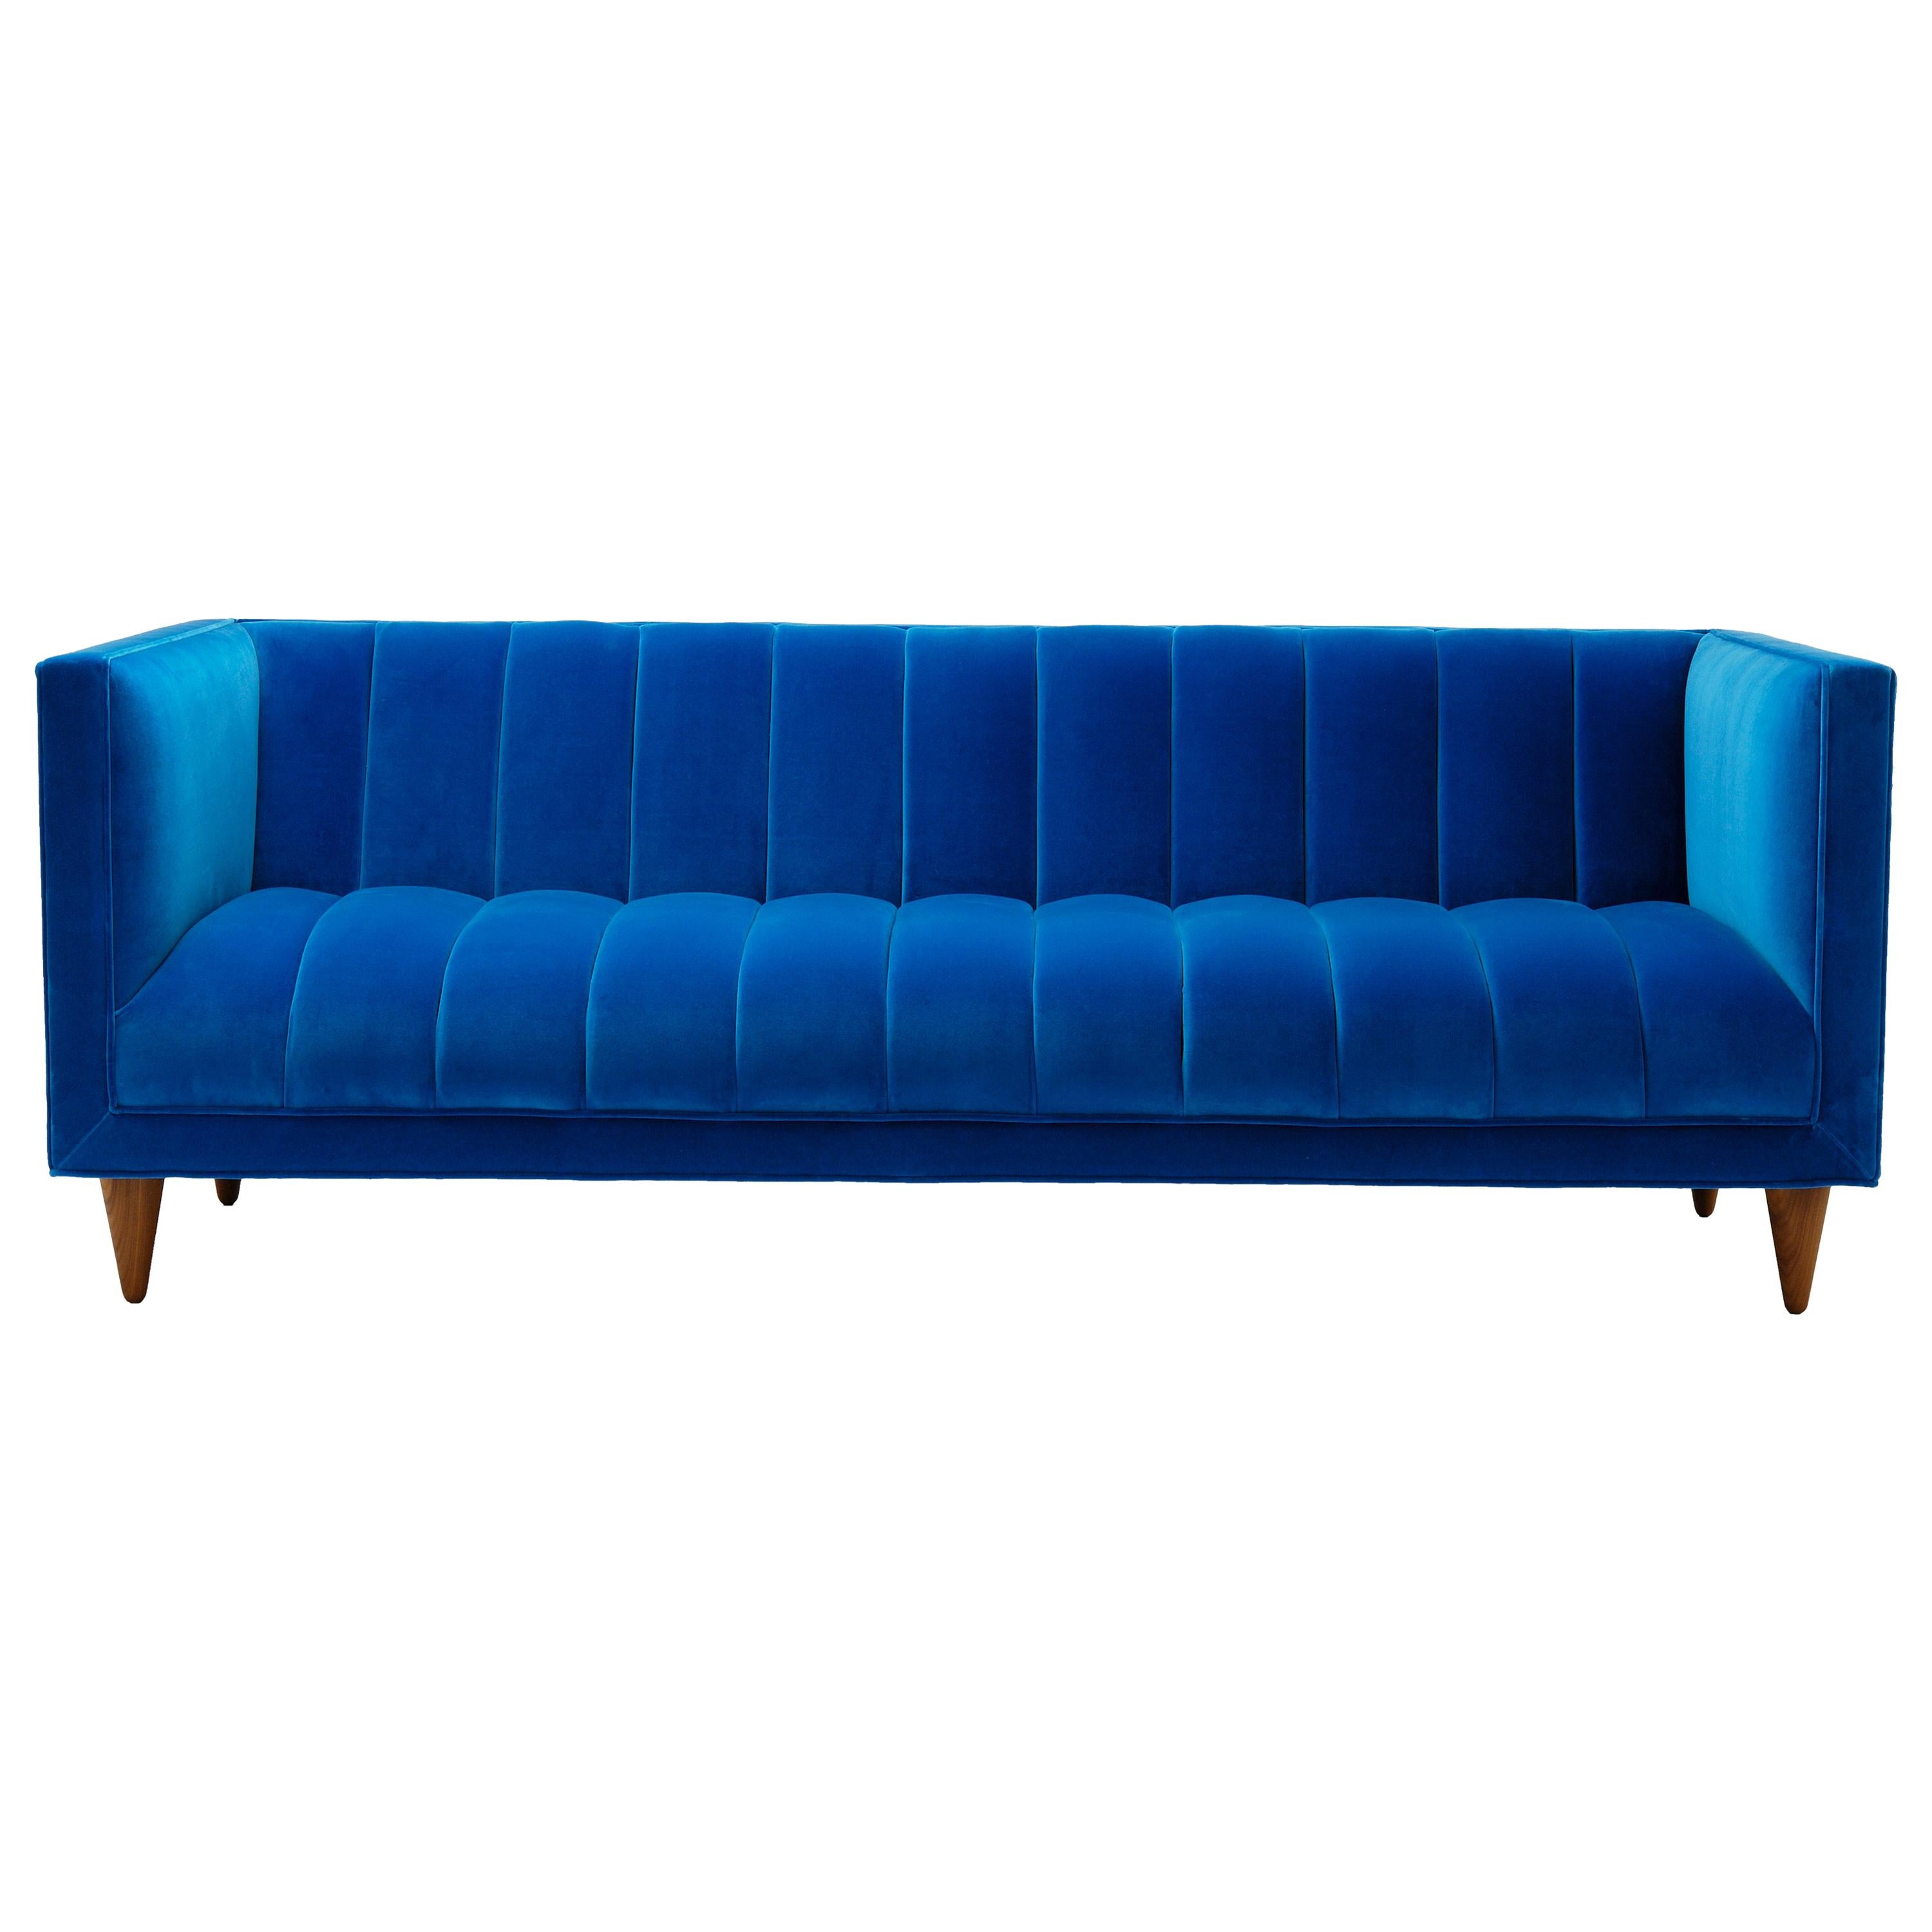 Contemporary Channeled Fleure Sofa in Teal Blue Velvet with Walnut Legs For Sale